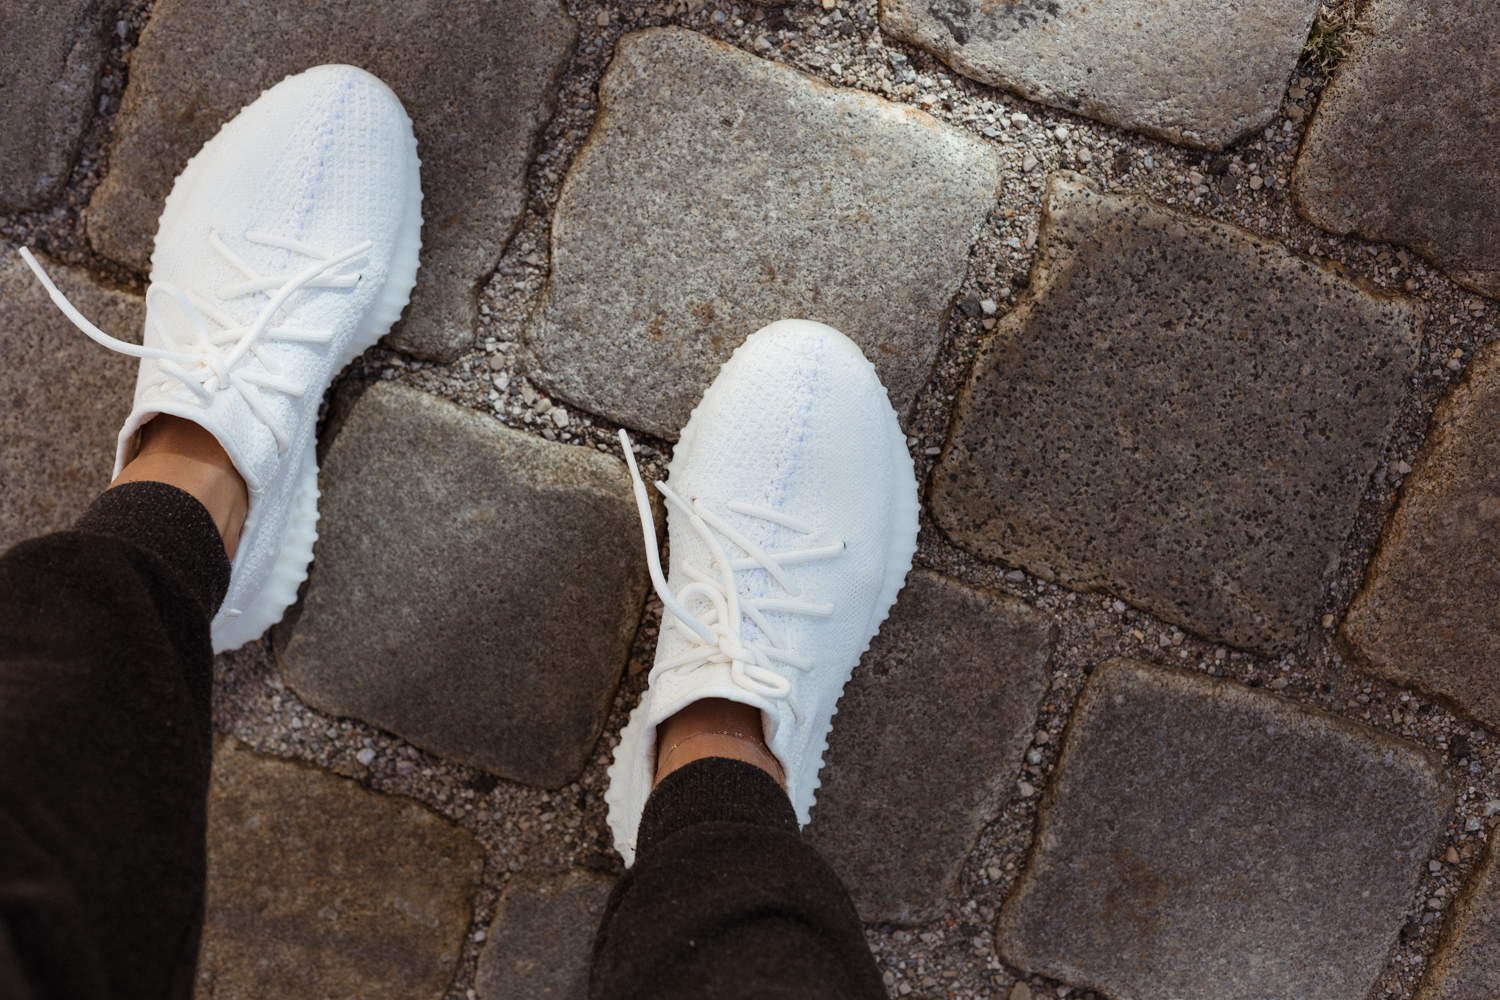 yeezy-boost-350-v2-triple-white-outfit 